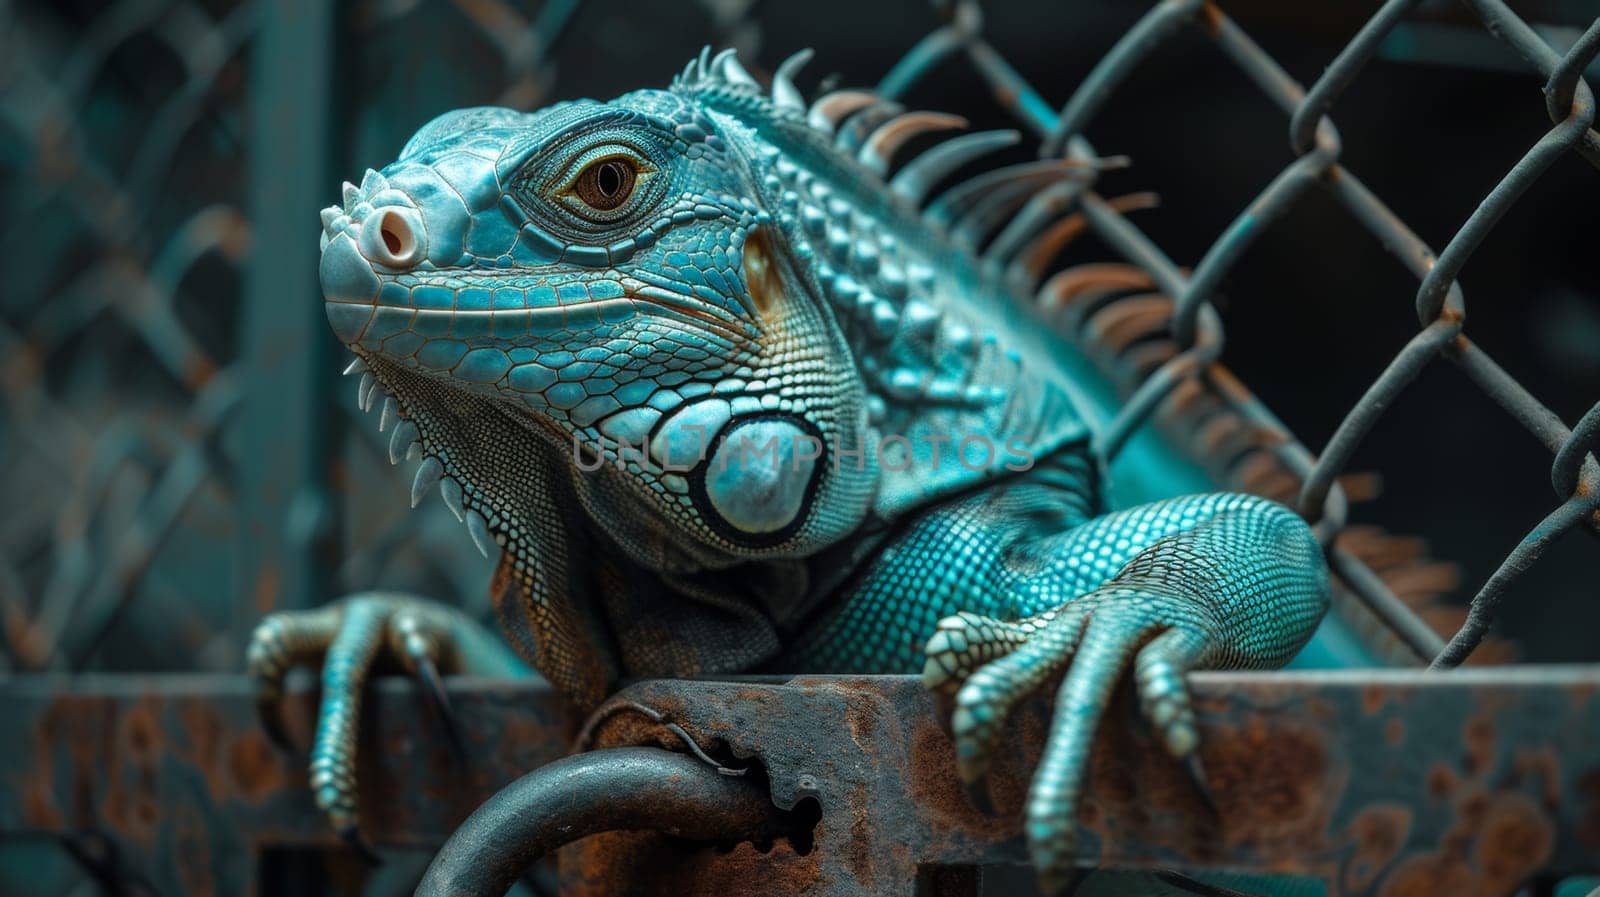 A large green iguana sitting on top of a fence, AI by starush